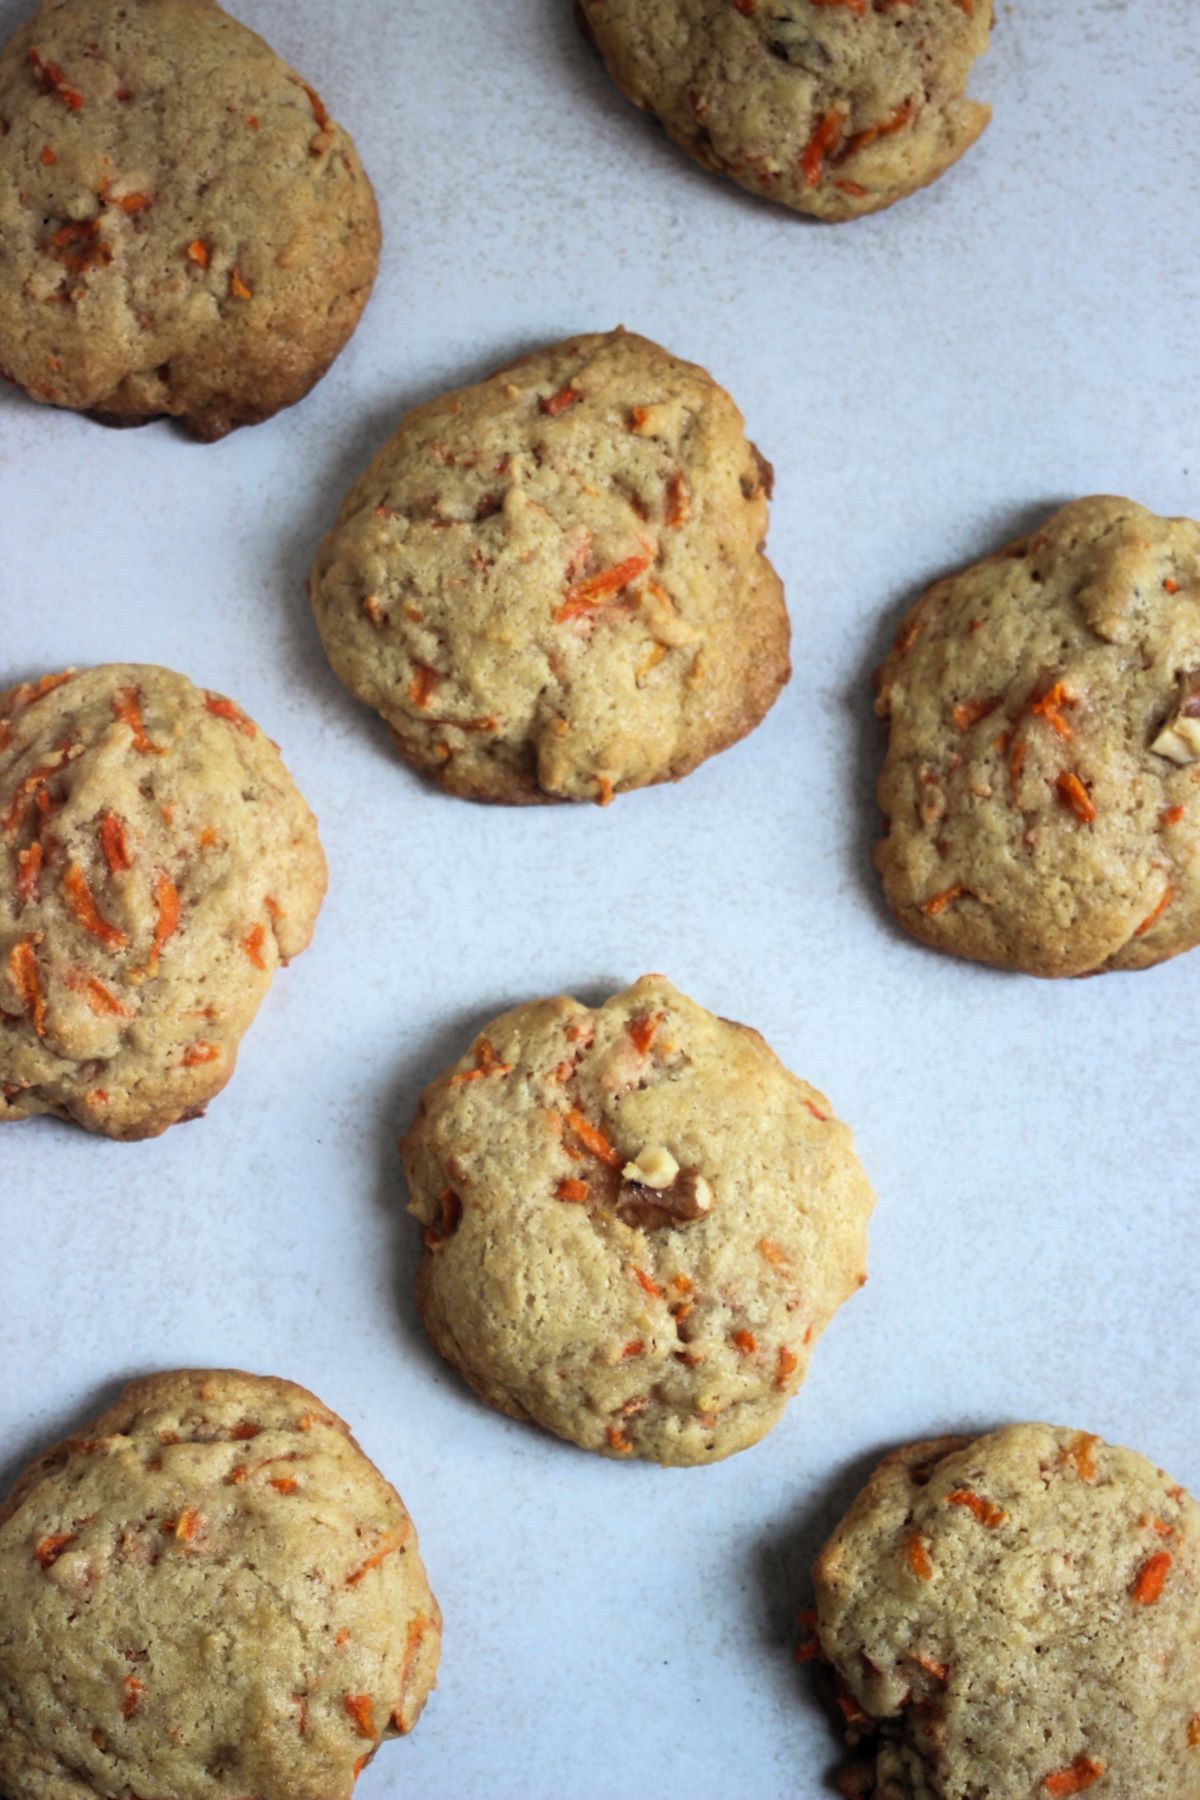 Carrot cake cookies on a white surface seen from above.